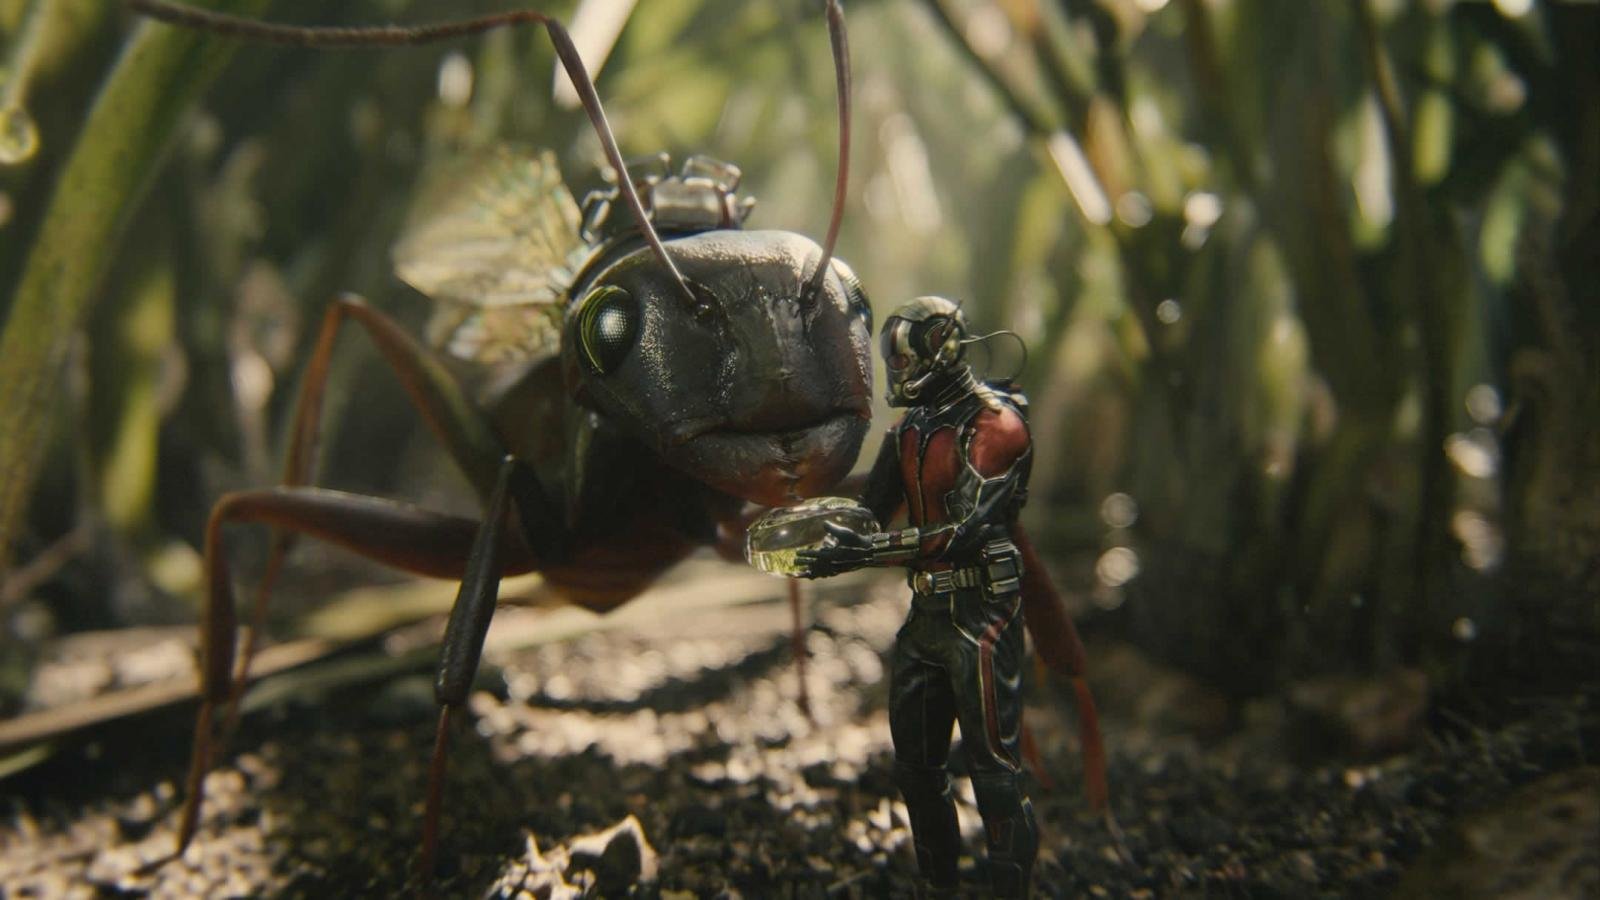 Ant Man Wallpapers Hd For Desktop Backgrounds